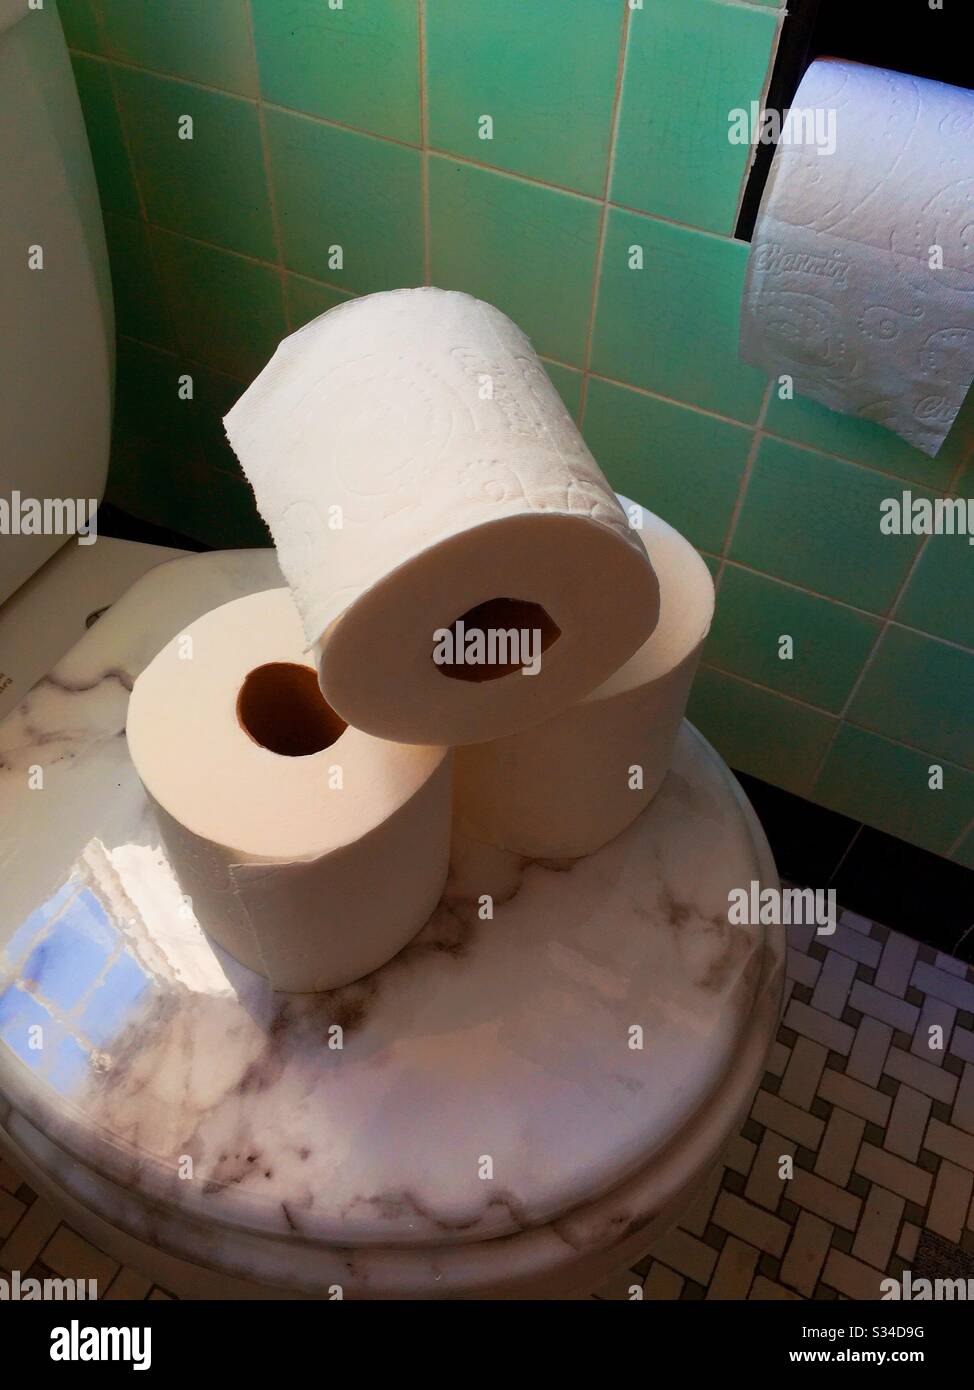 Toilet paper Rolls stacked on a toilet seat lid in a green tiled residential bathroom, USA Stock Photo